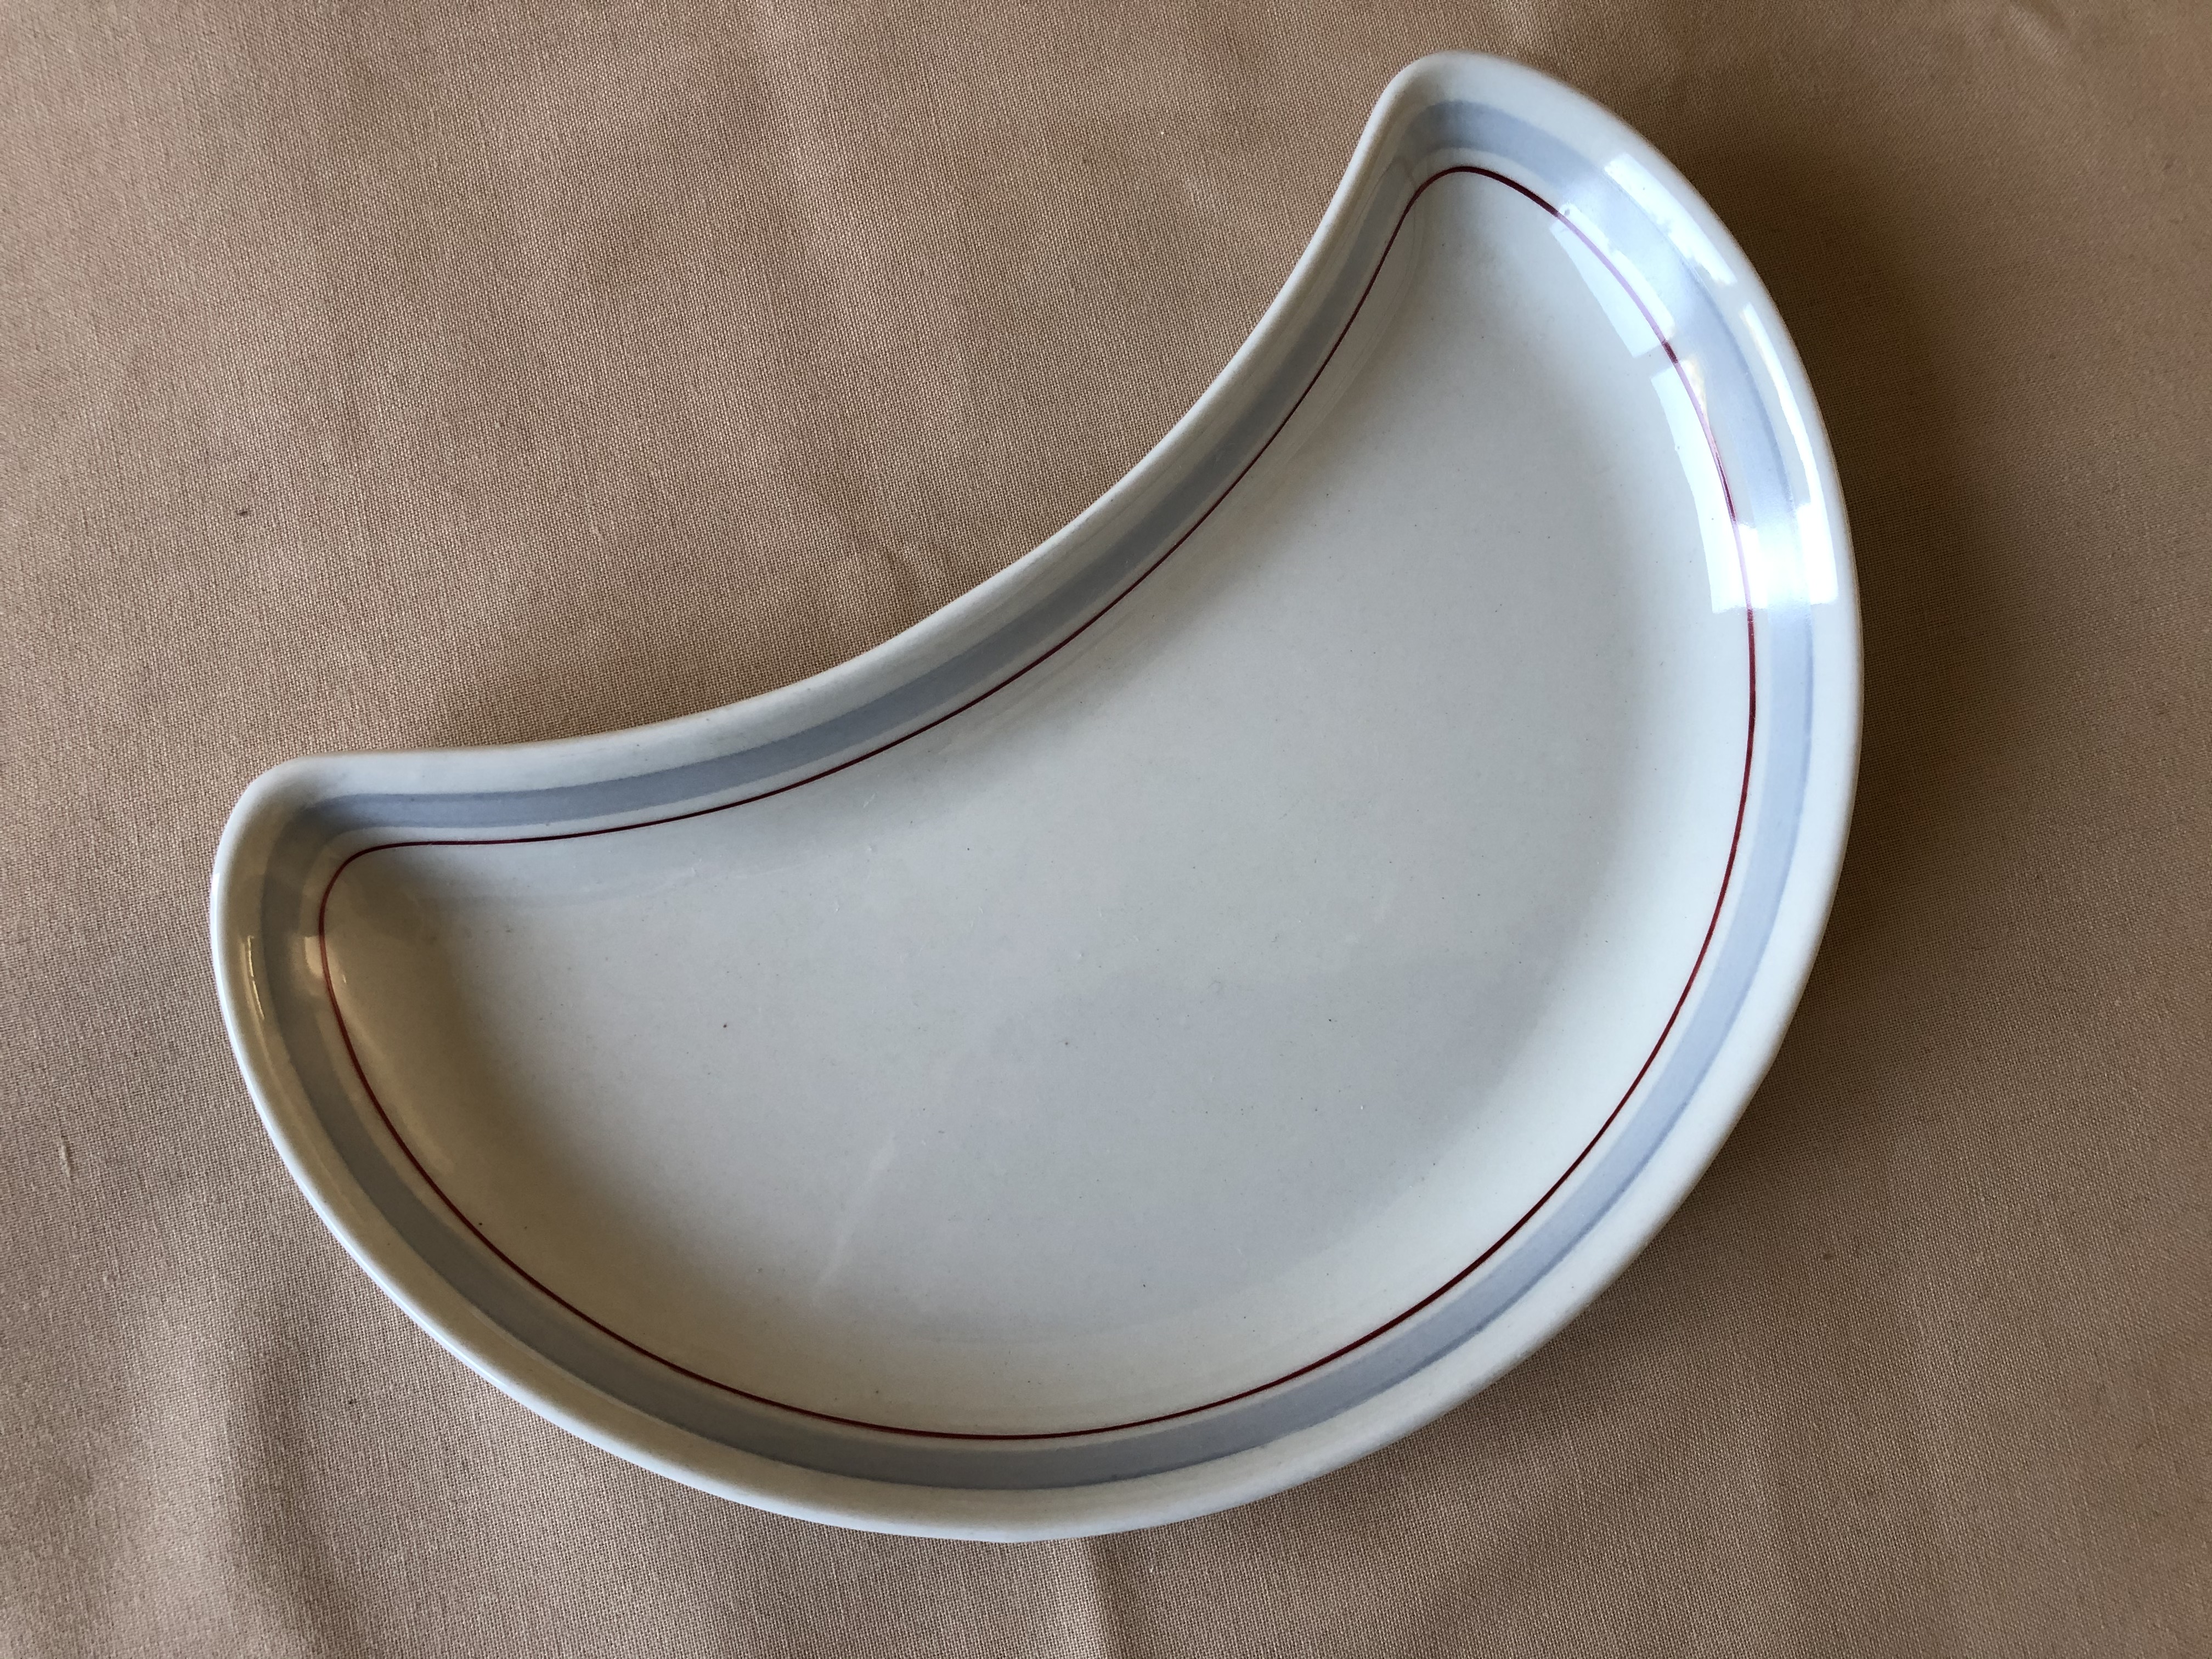 HALF MOON SERVING DISH FROM THE CANADIAN PACIFIC SHIPPING COMPANY